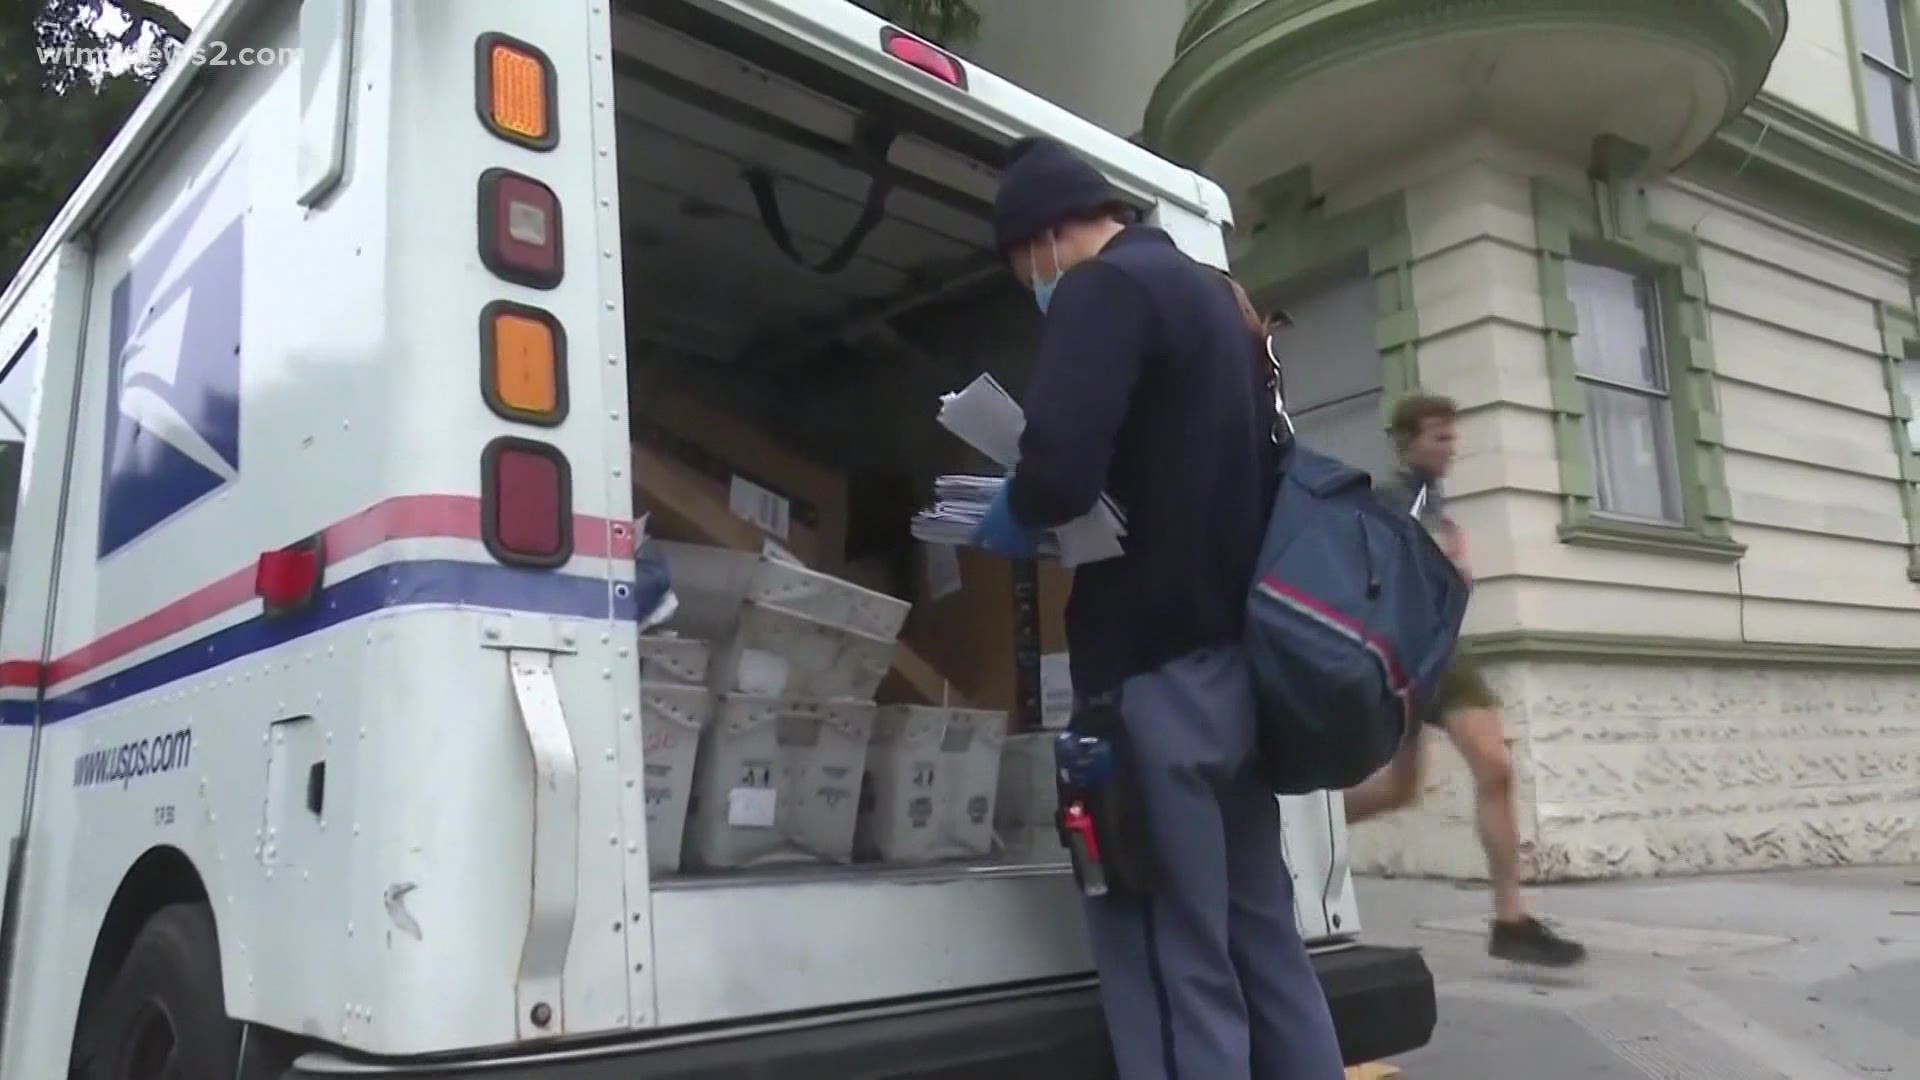 A new bill would prohibit the Postmaster General from political fundraising and campaign activities.